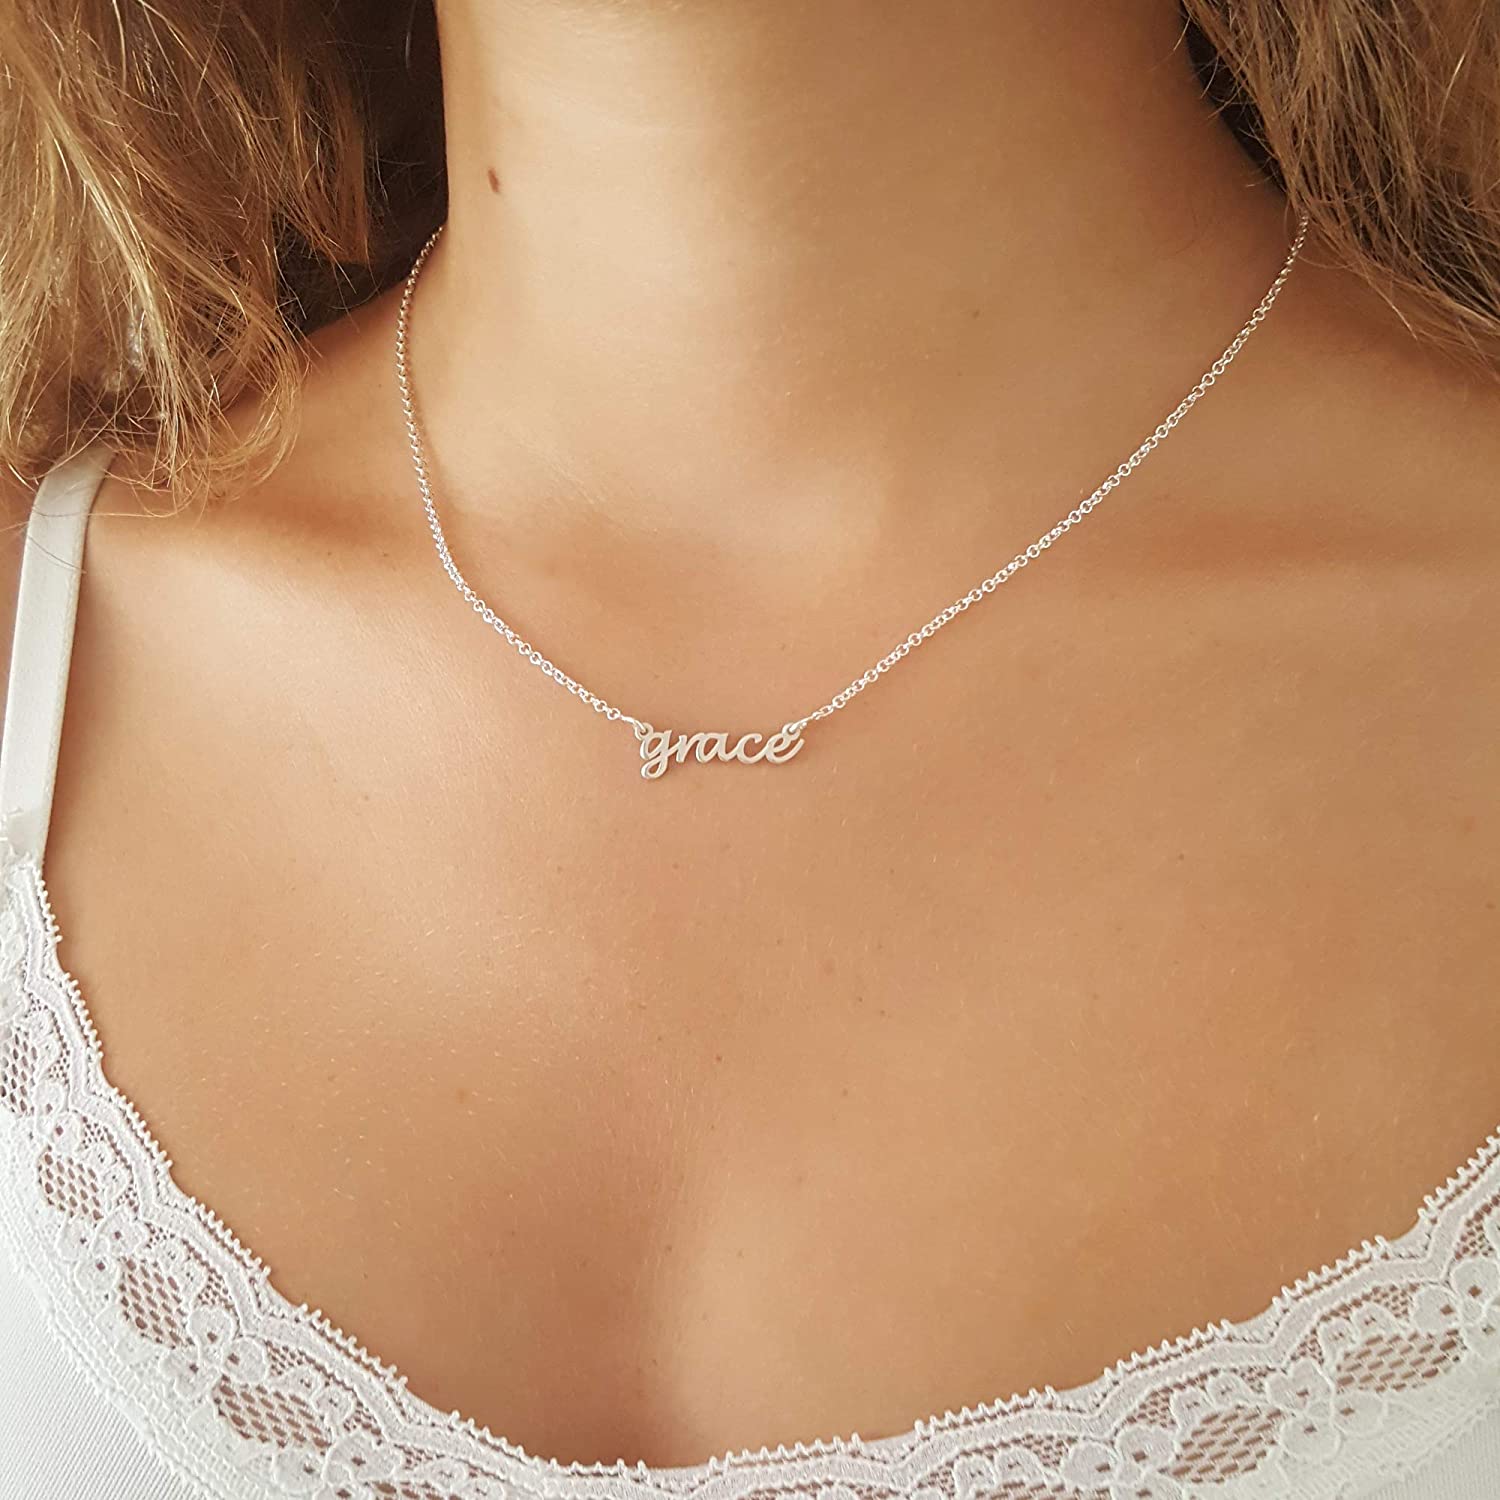 Custom Made Tiny Name Necklace, Any Personalized Name Sterling Silver